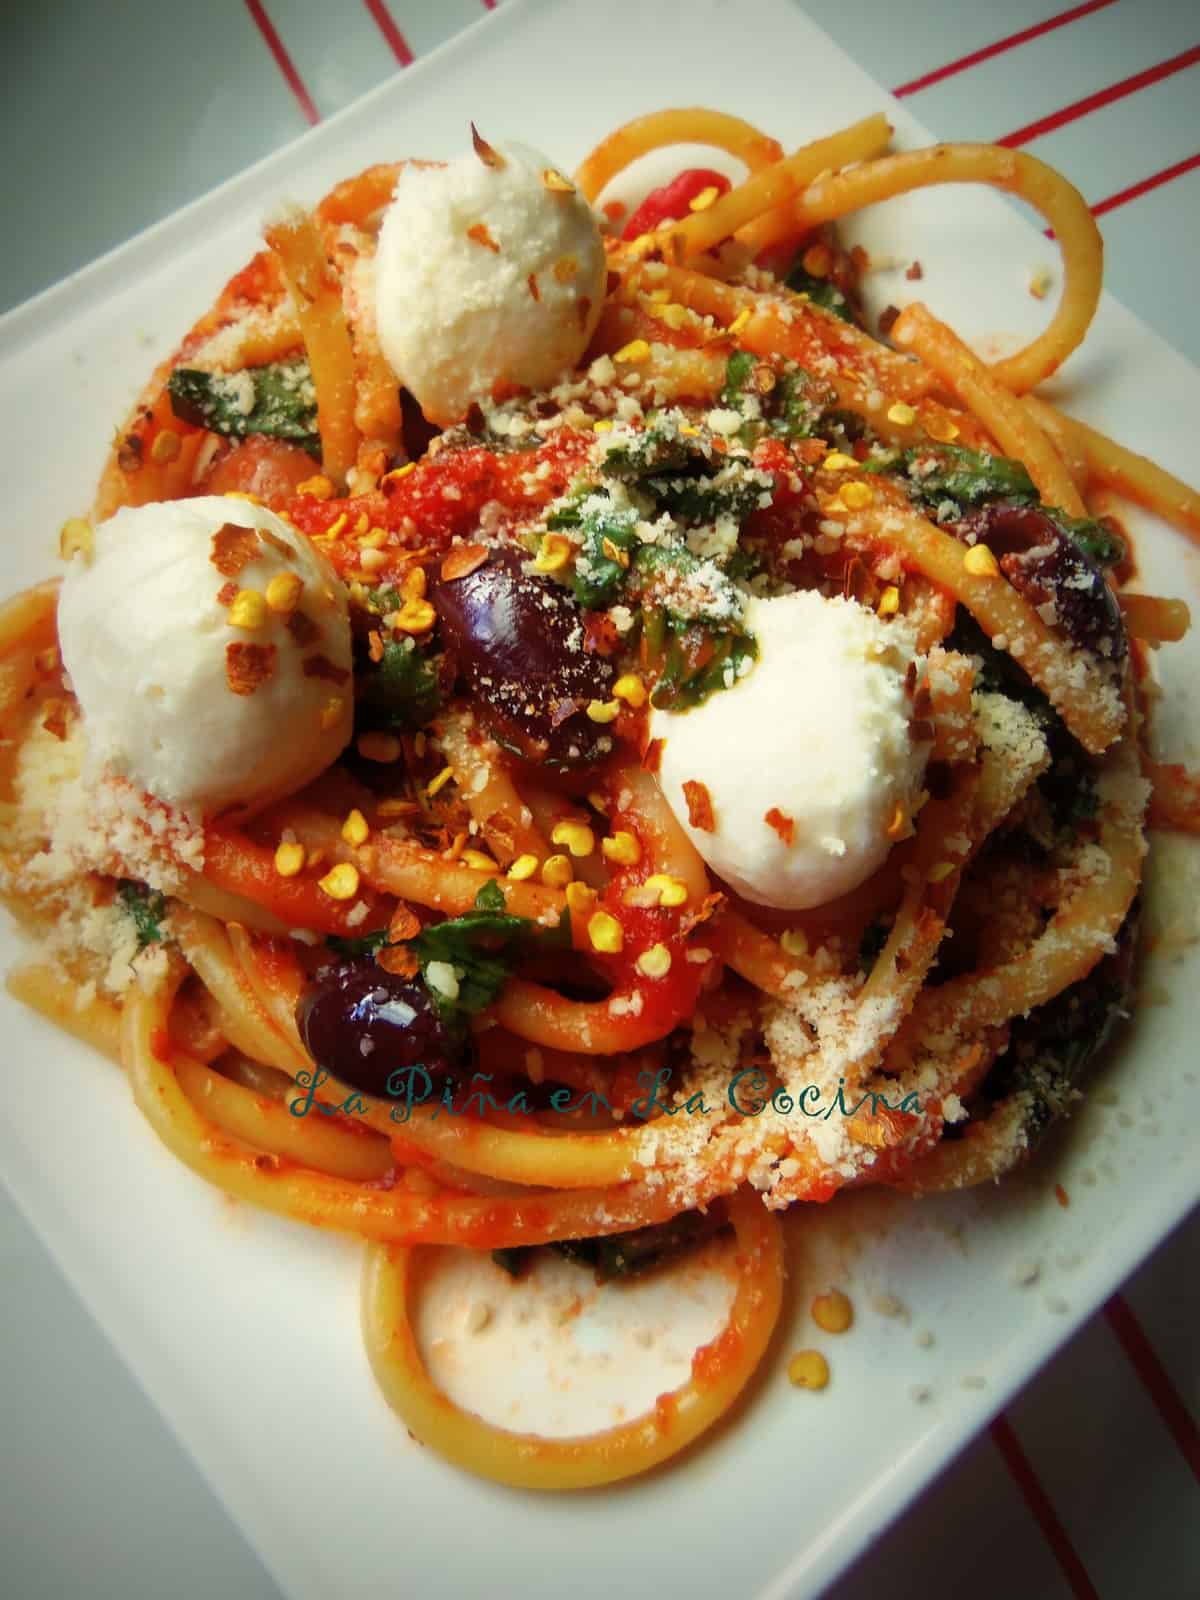 Fresh Mozzarella, Kalamata Olives, Garlic, Parmesan and Fresh Basil Tossed in with The Spicy Red Sauce and Spaghetti